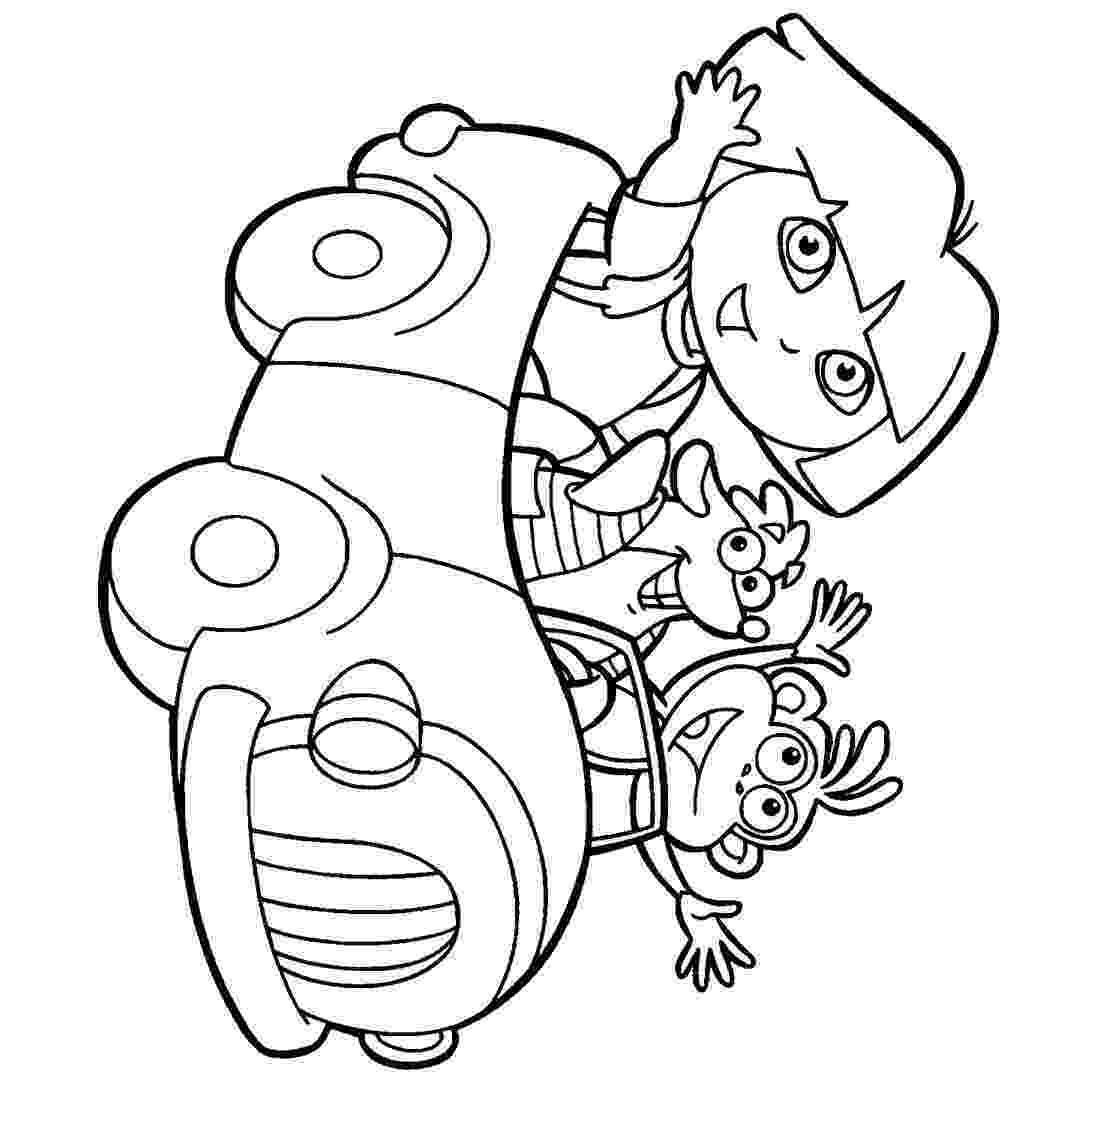 dora colouring dora colouring pictures coloring pages to print colouring dora 